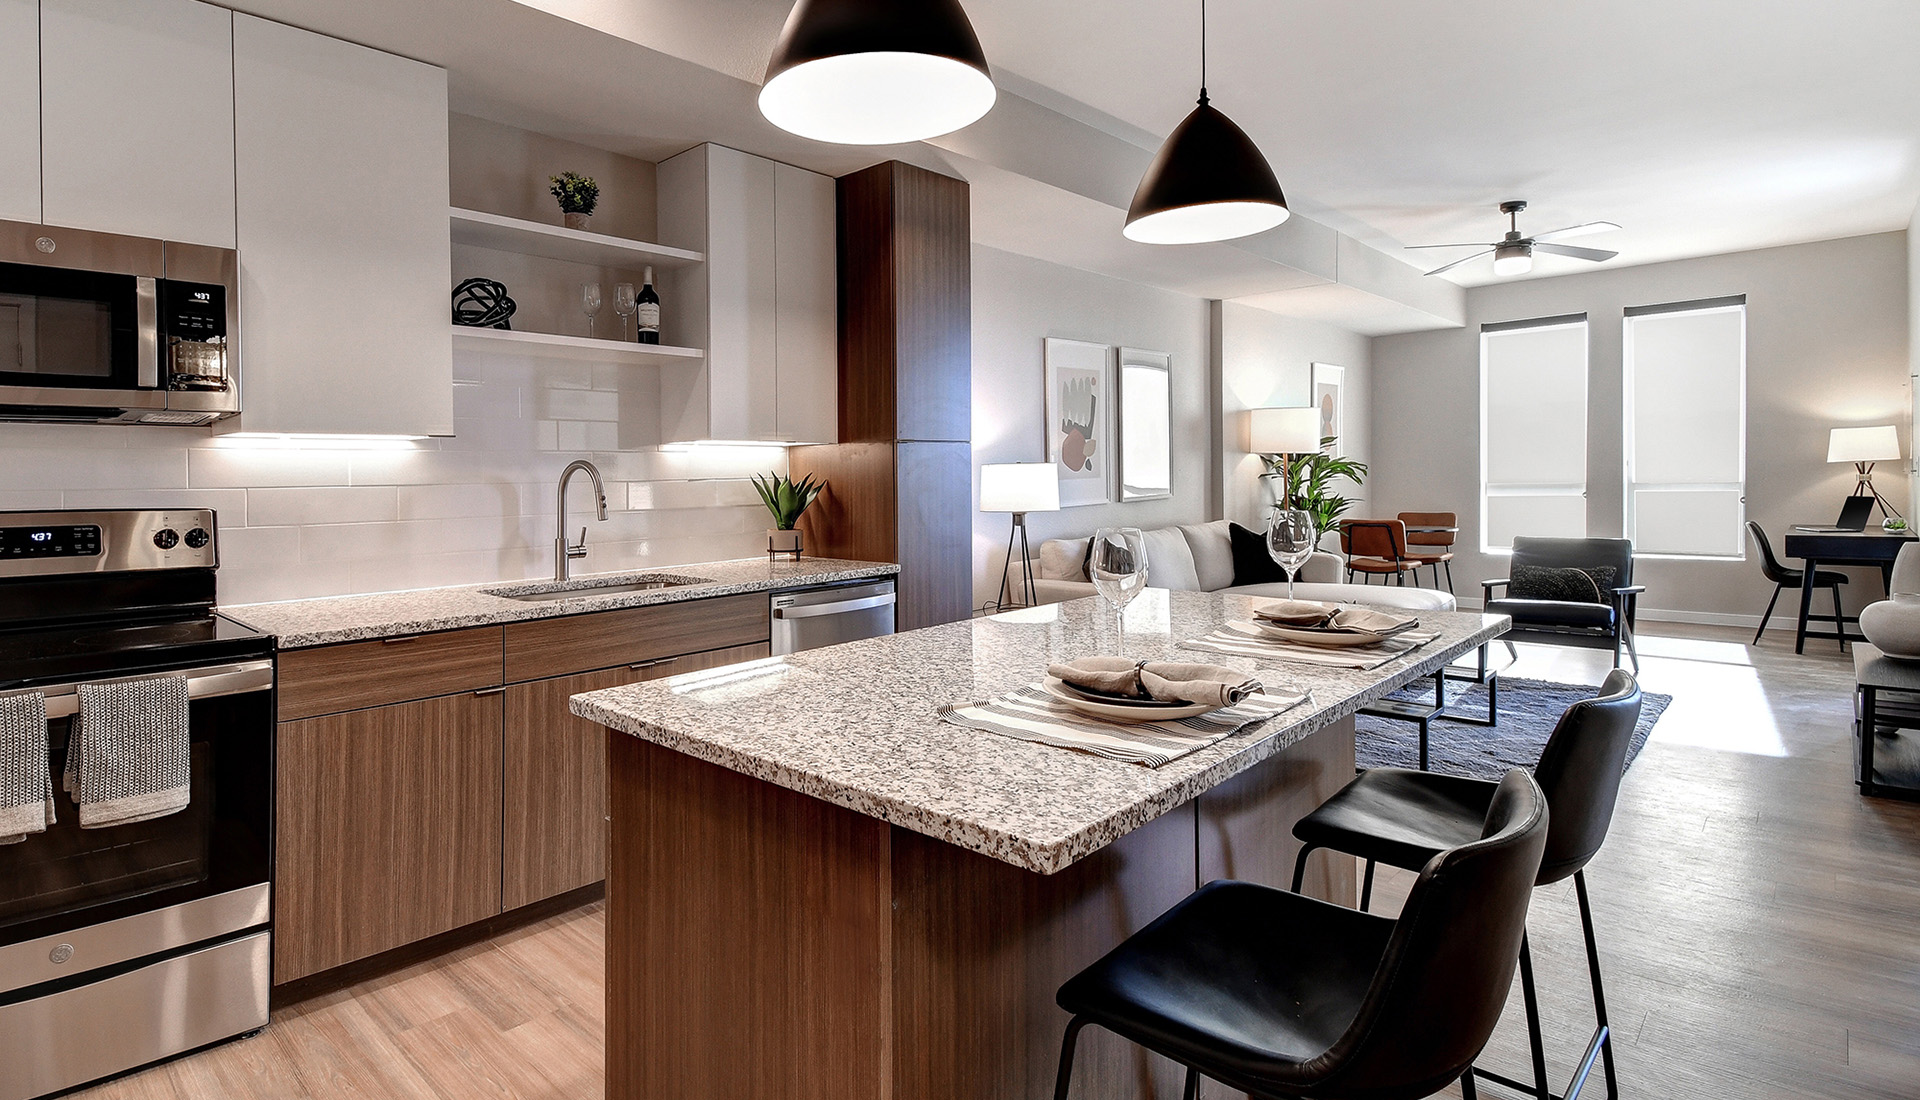 Kitchen with white and light wood cabinets, island with quartz countertop and black leather barstools, stainless steel appliances, and views into living room